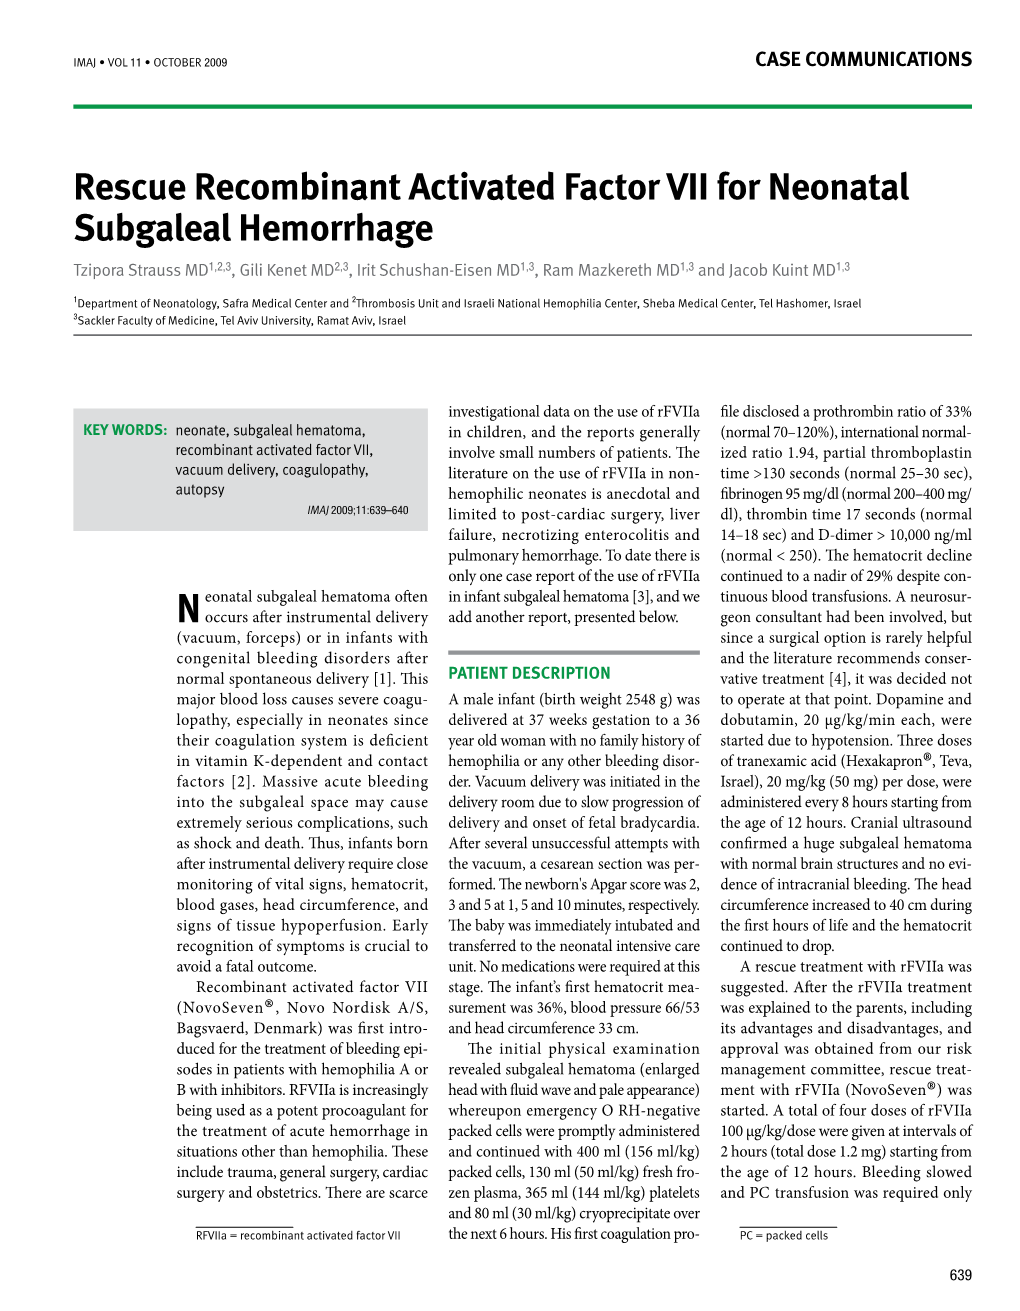 Rescue Recombinant Activated Factor Vii for Neonatal Subgaleal Hemorrhage